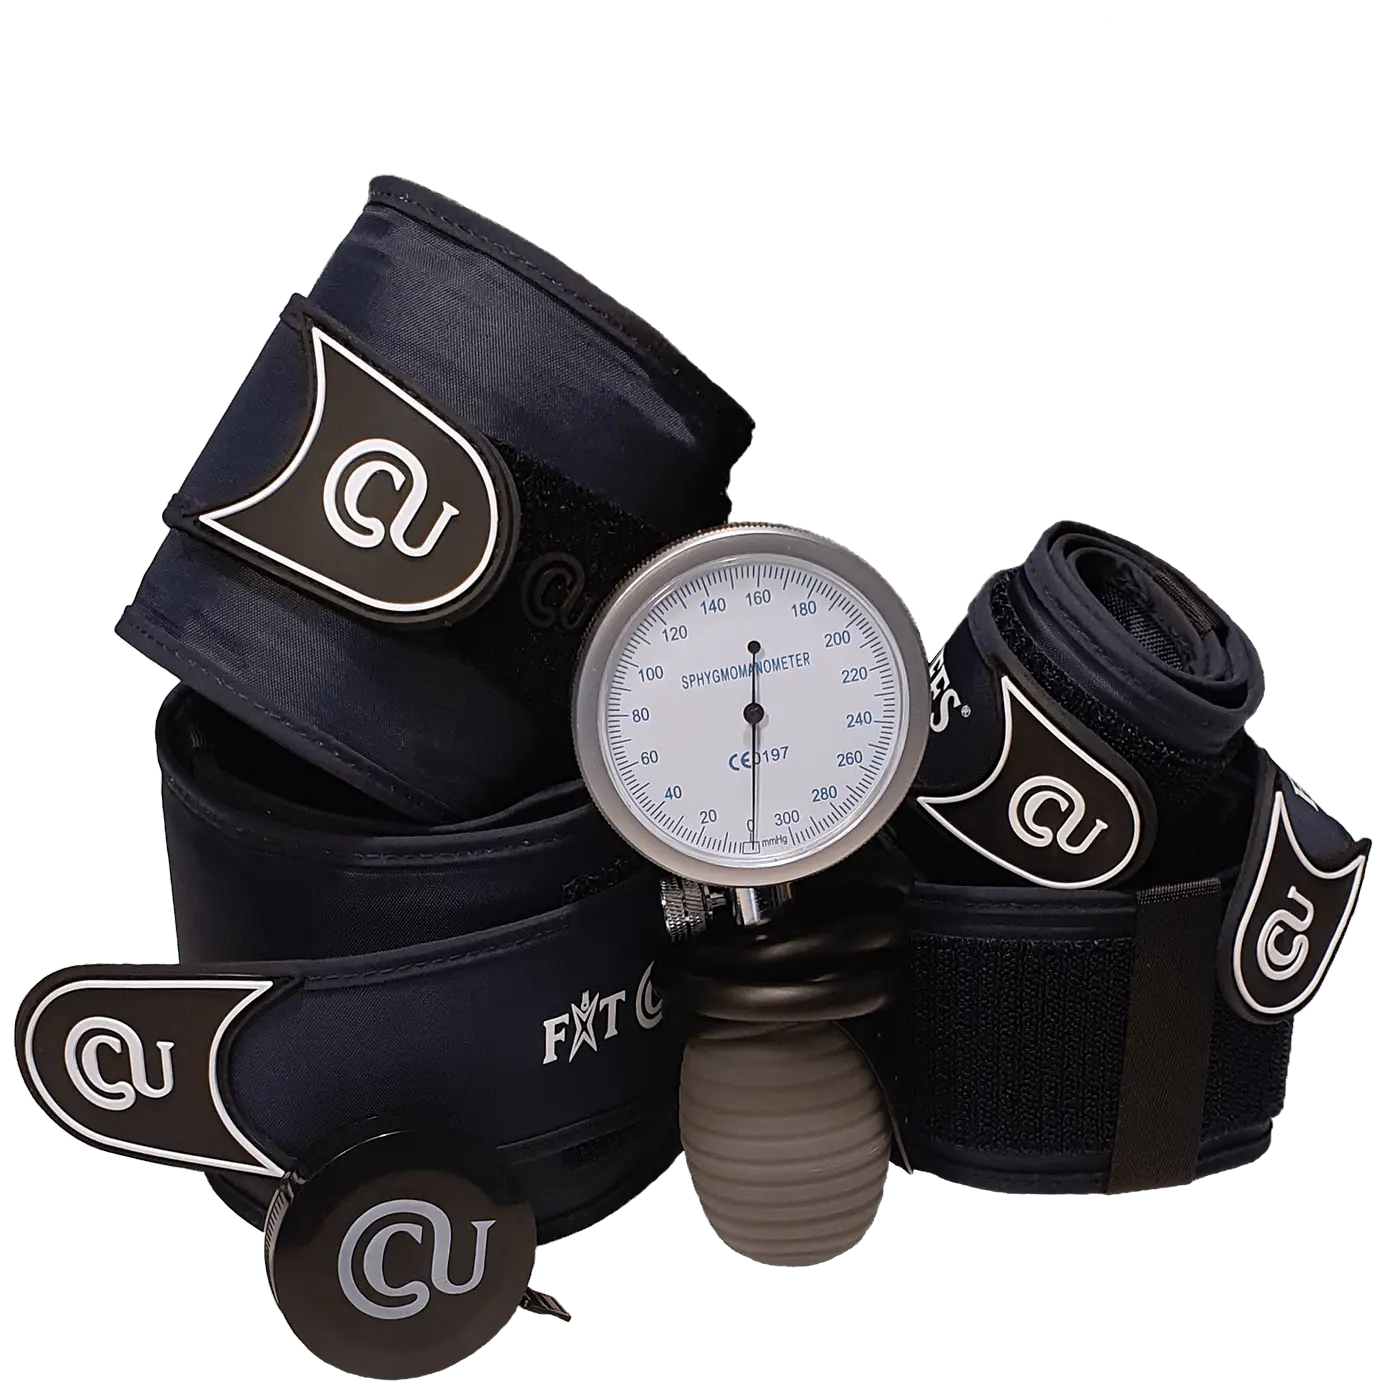 Billede af Fit Cuffs - Complete (One Size Fits All) - Must Go